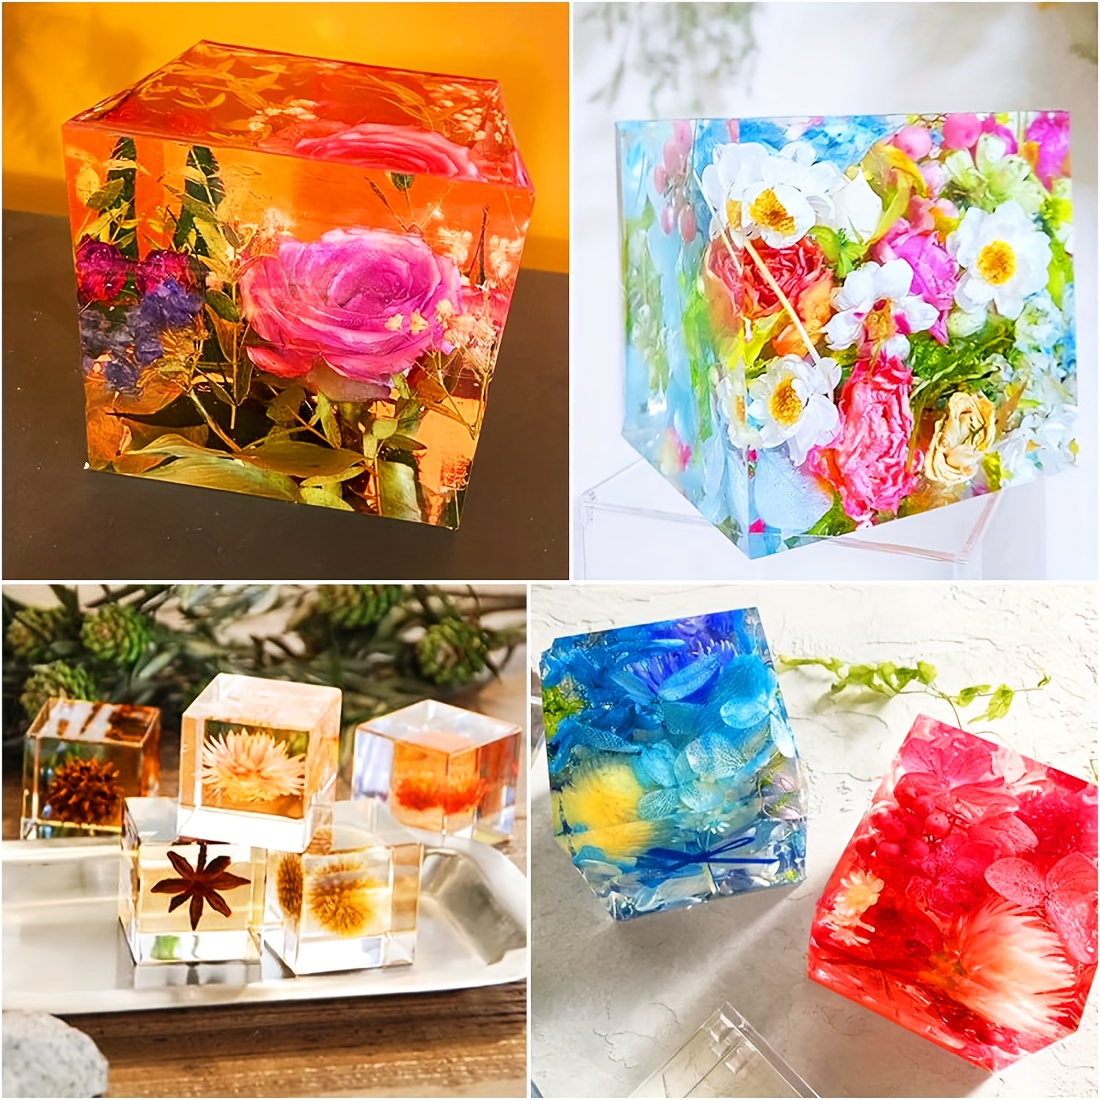 4 Inches Cube Transparent Silicone Molds Transparent Square Silicone Molds  Epoxy Resin Art Casting Molds DIY Home Gifts for Her Him 